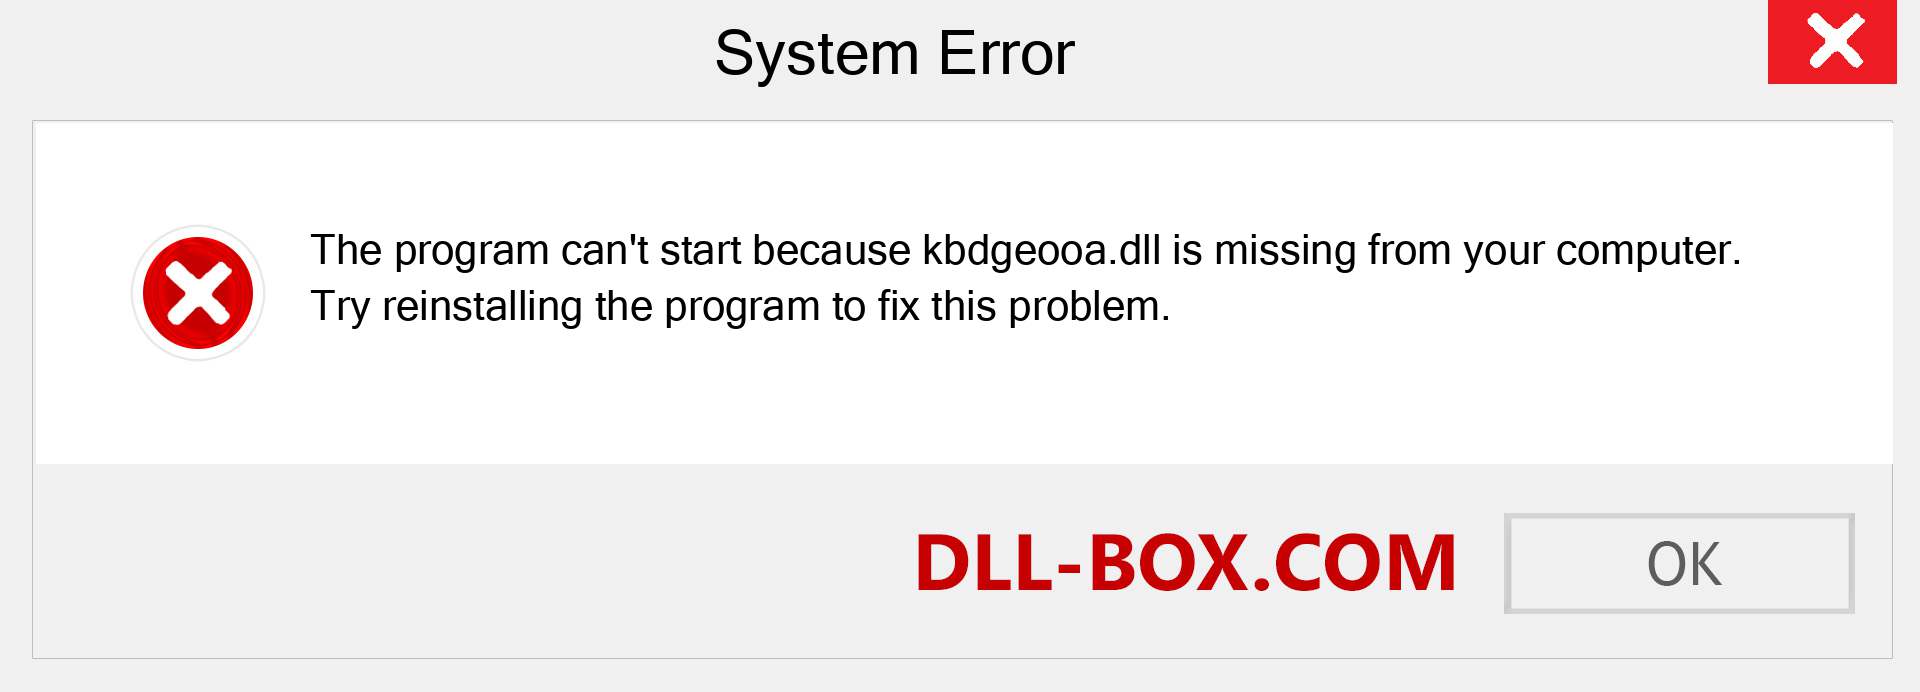  kbdgeooa.dll file is missing?. Download for Windows 7, 8, 10 - Fix  kbdgeooa dll Missing Error on Windows, photos, images